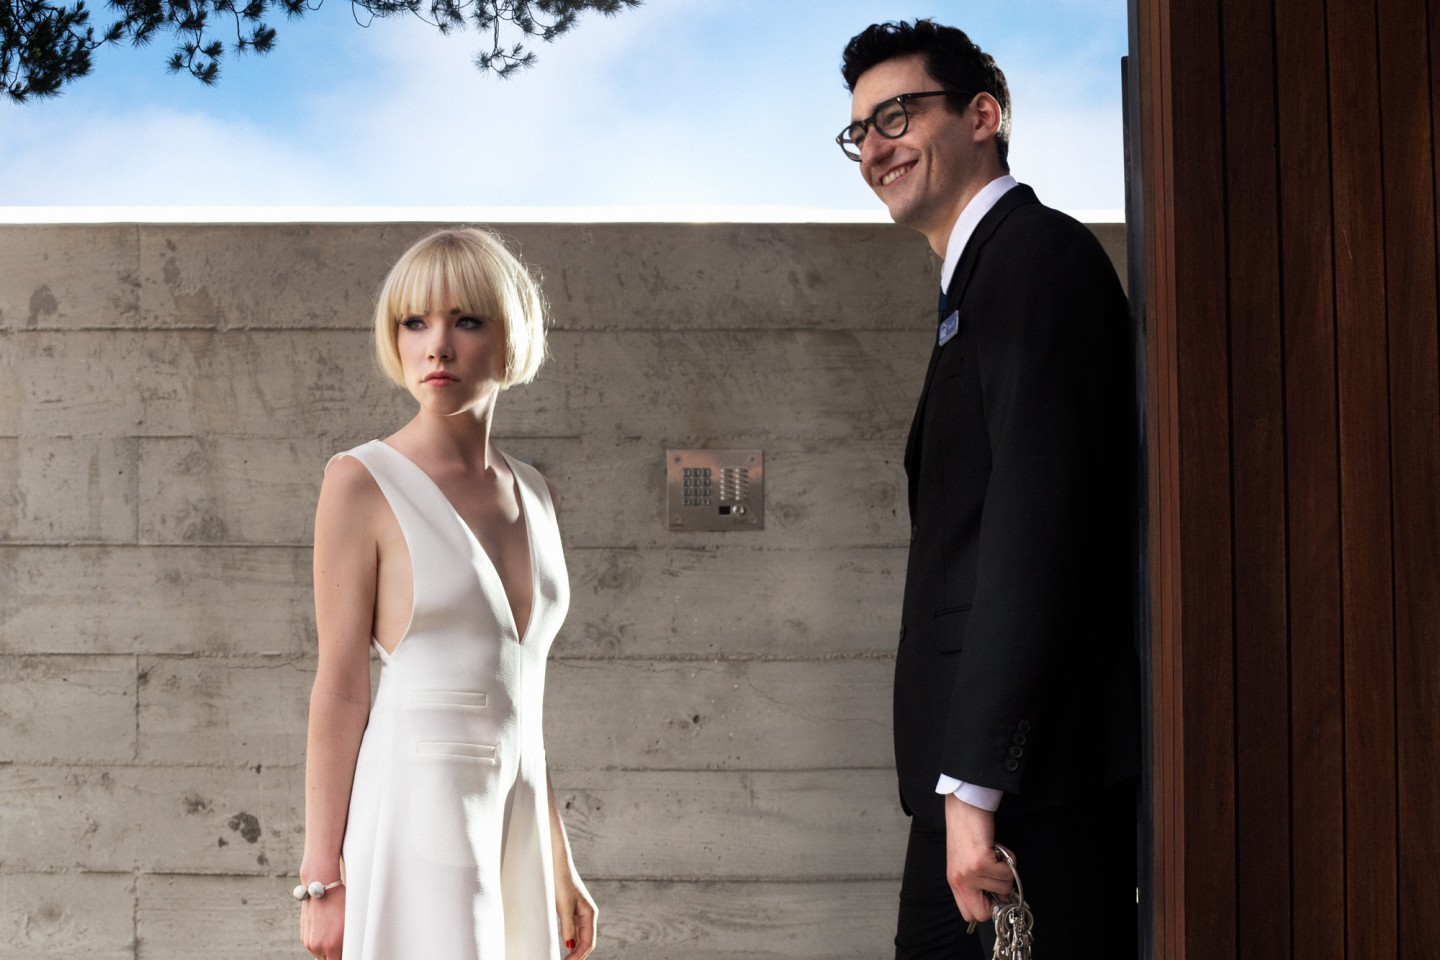 Carly Rae Jepsen And Danny L Harle On Their PC Music Collaboration “Super Natural”